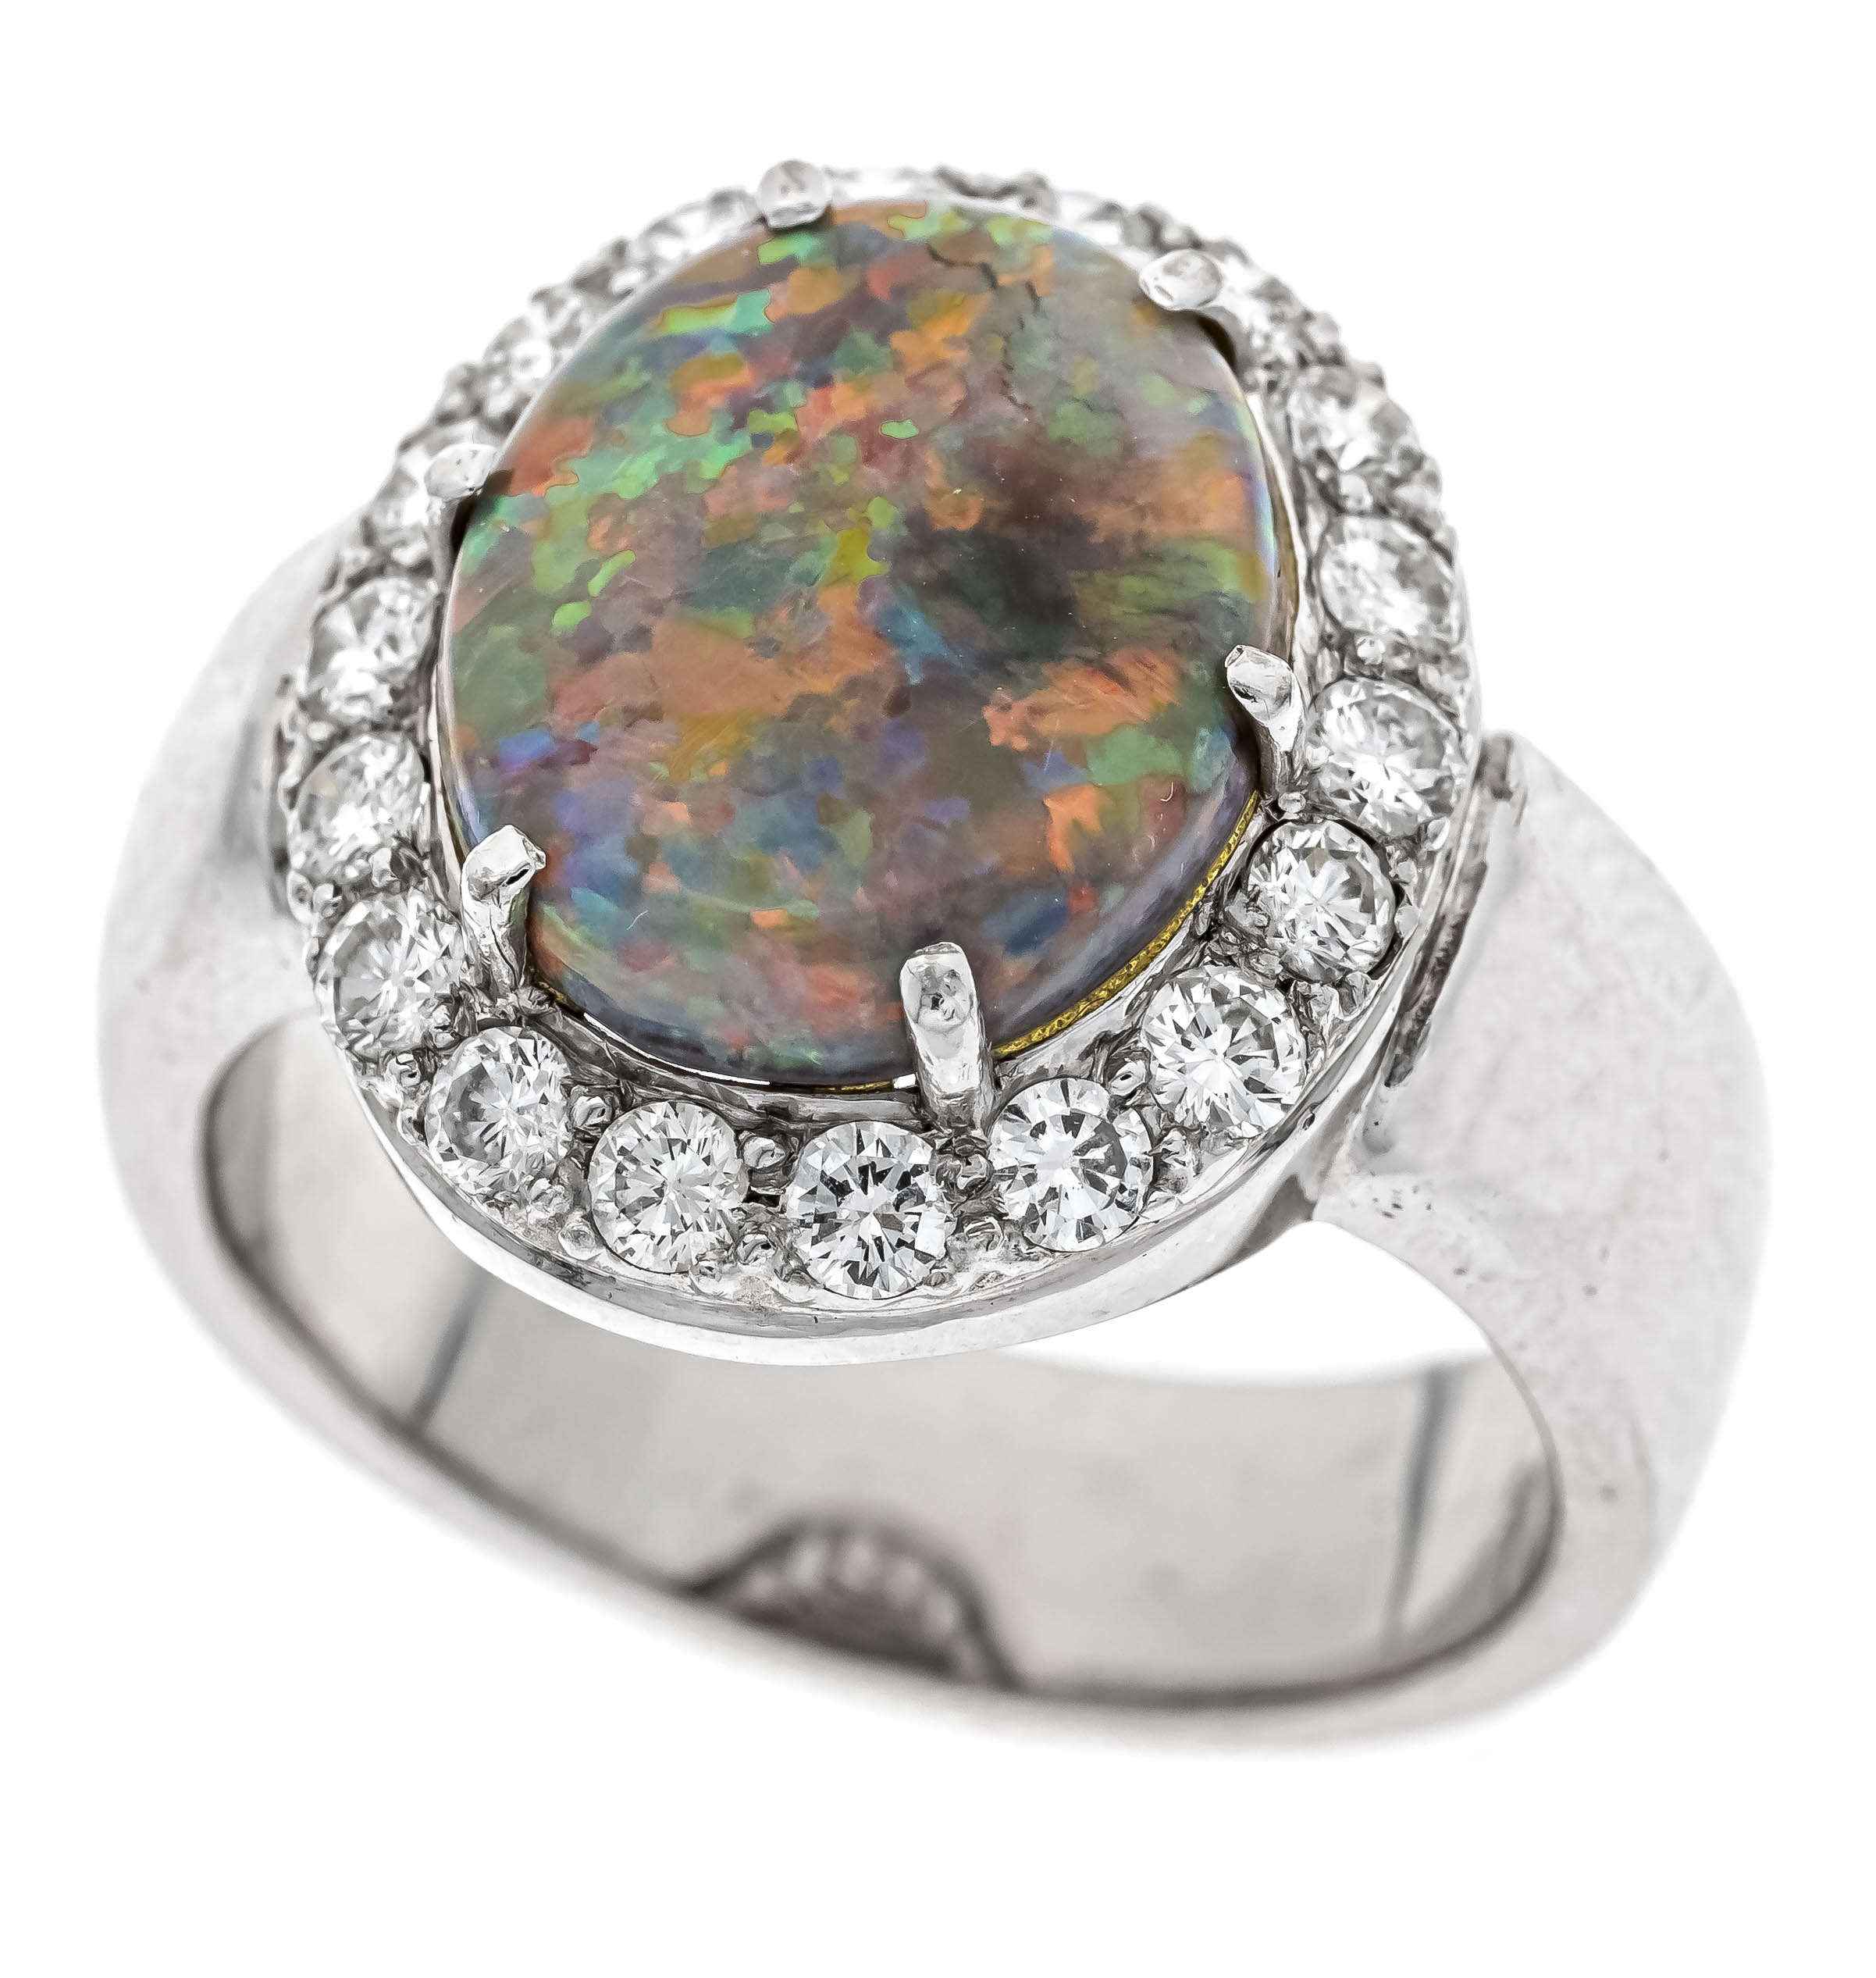 Precious opal diamond ring WG 750/000 with an excellent oval precious opal cabochon 4.00 ct, vivid